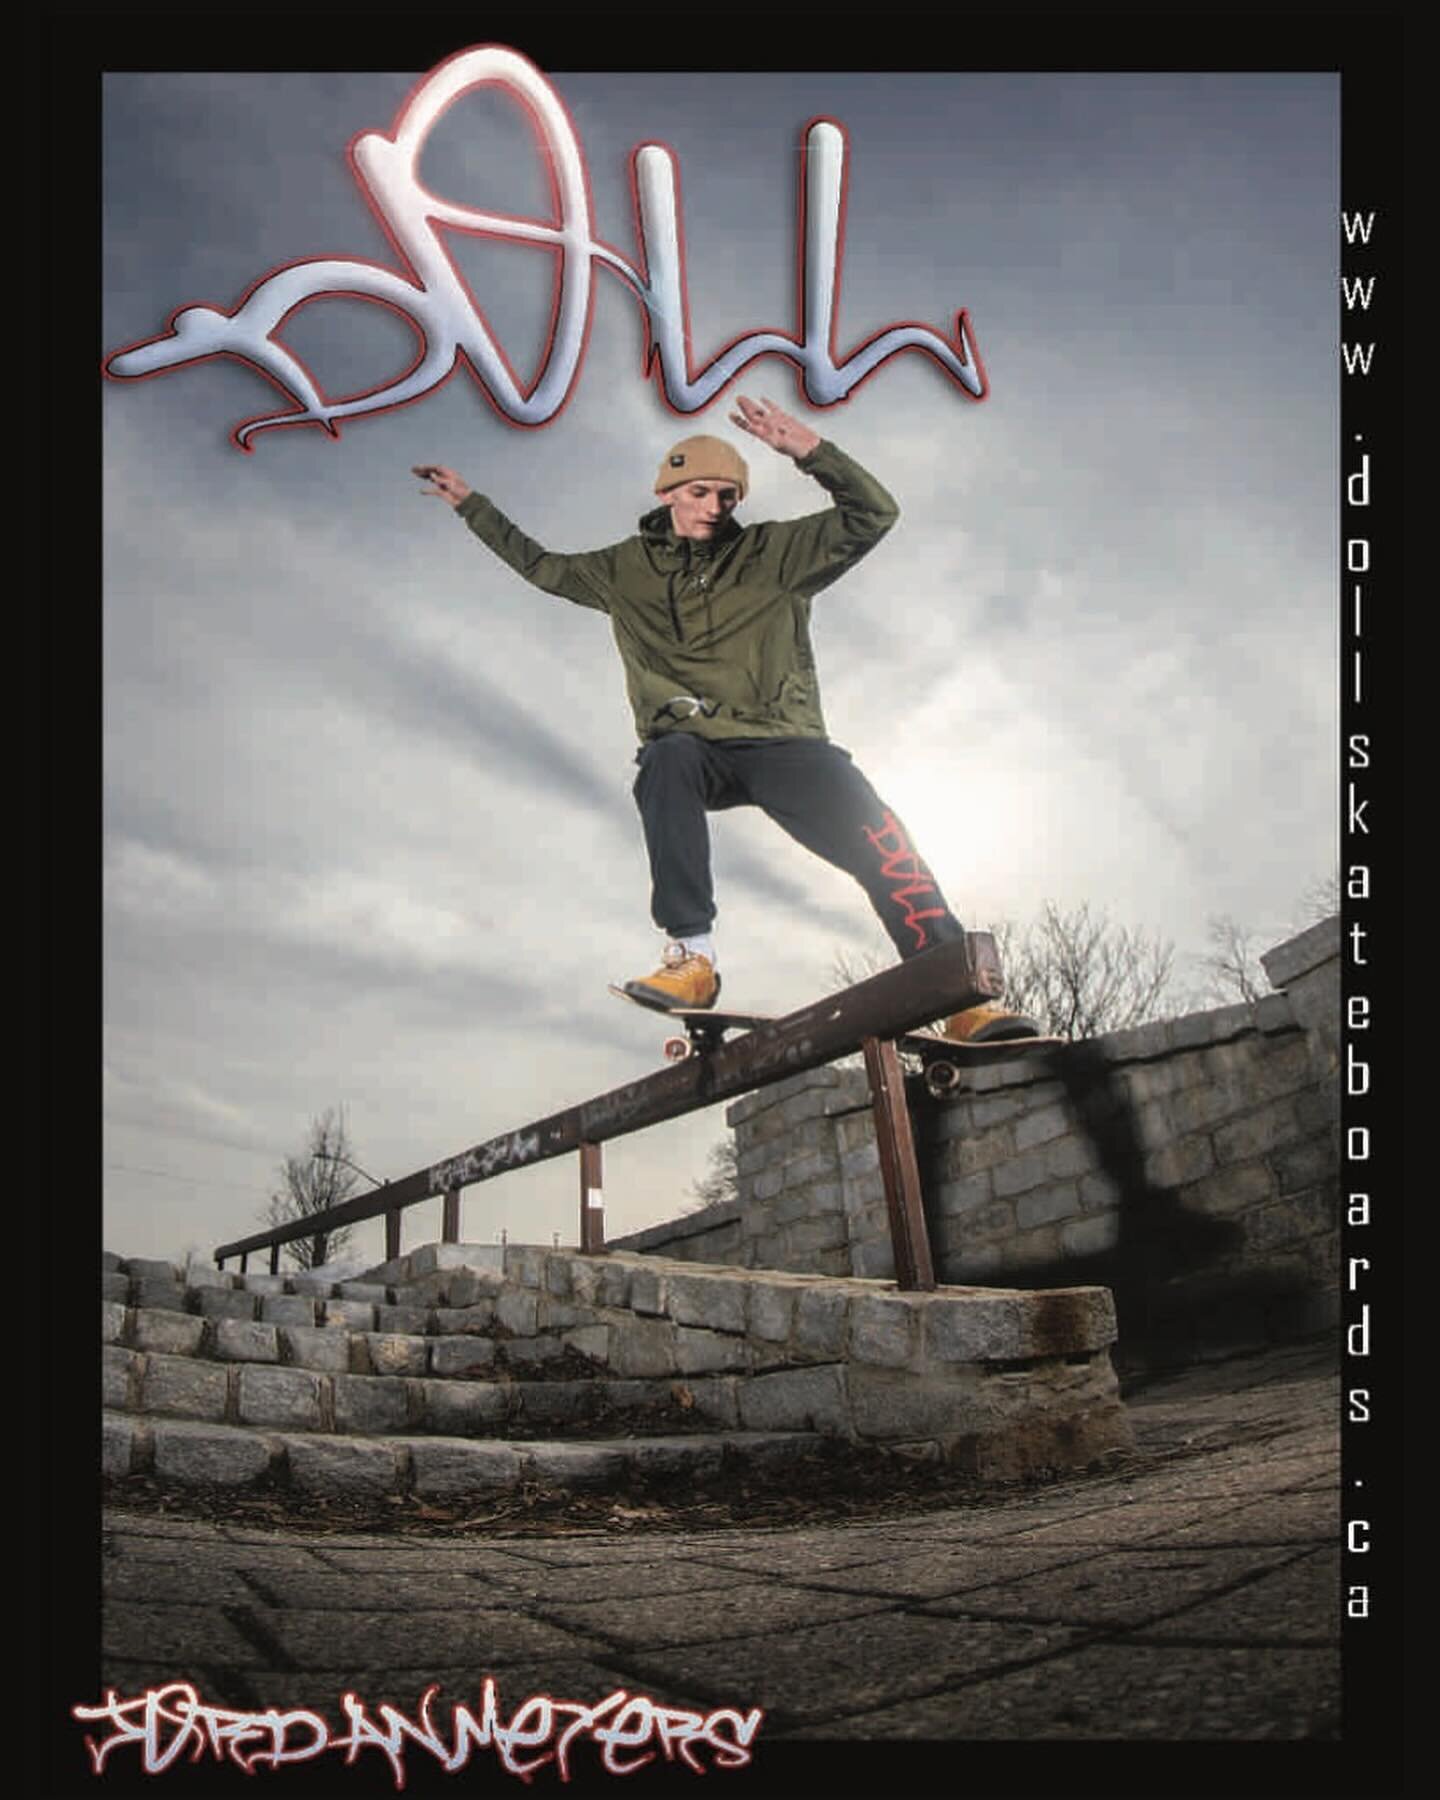 Great to see @jordanwmeyers in the latest issue of @sbcskateboardmag in an ad from @dollskateboards

Swipe over to see a great shot on the cover by @n8pride It is always good to see his photos. Check his work in @igloo_zine and many other places. 

#